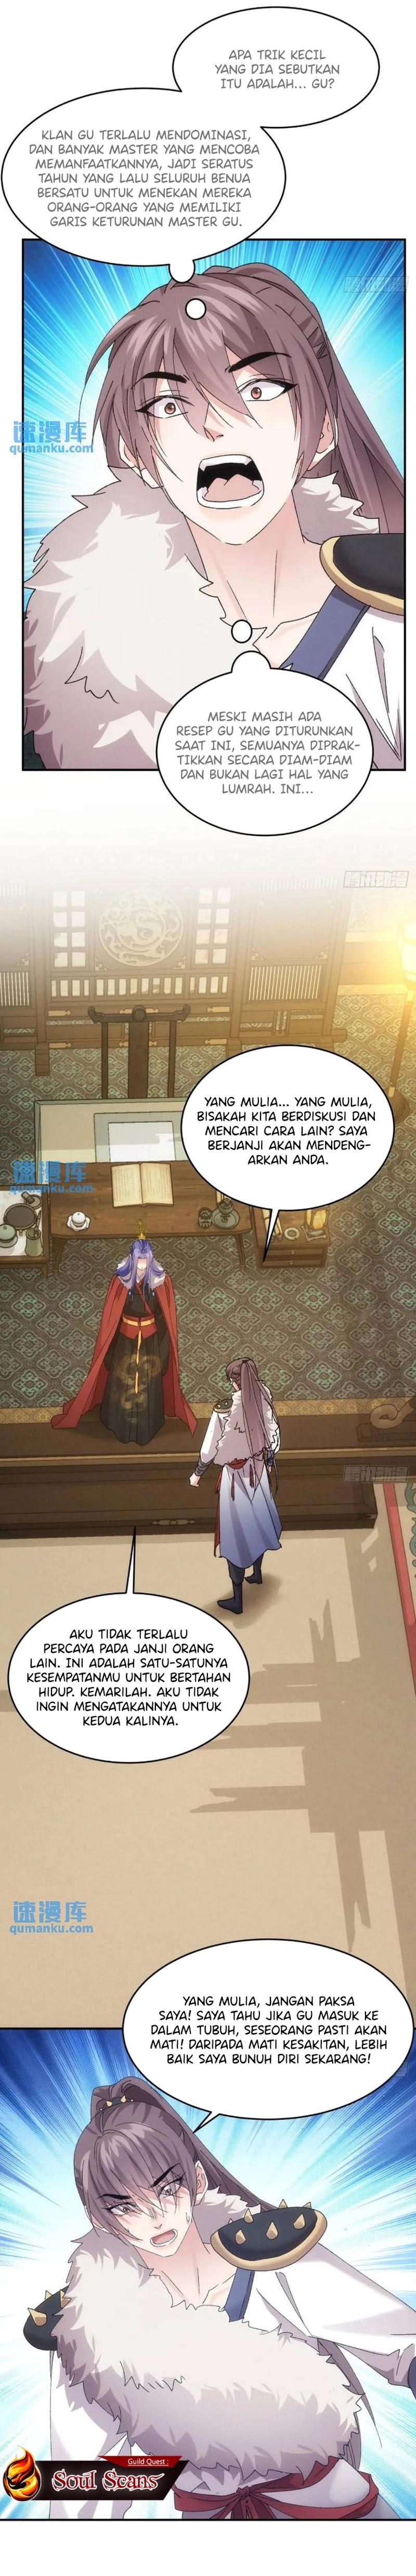 Dilarang COPAS - situs resmi www.mangacanblog.com - Komik i just dont play the card according to the routine 195 - chapter 195 196 Indonesia i just dont play the card according to the routine 195 - chapter 195 Terbaru 9|Baca Manga Komik Indonesia|Mangacan